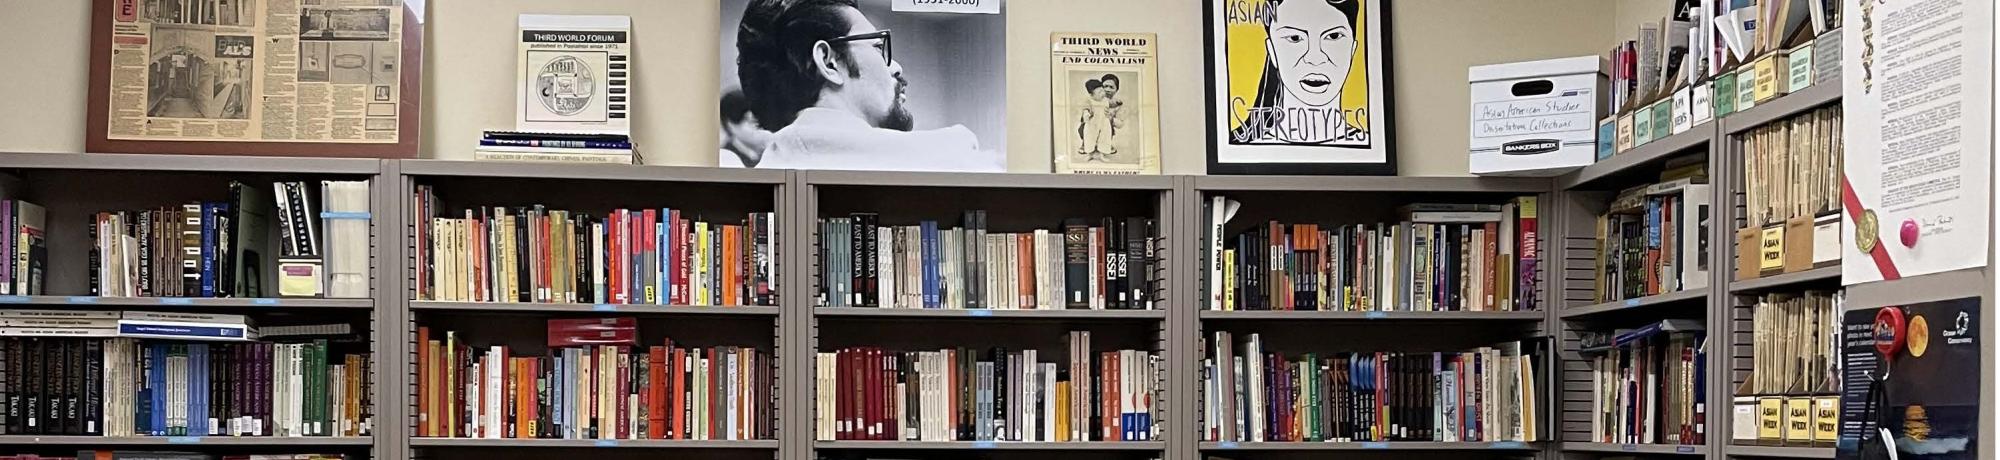 George Kagiwada library bookshelves and posters